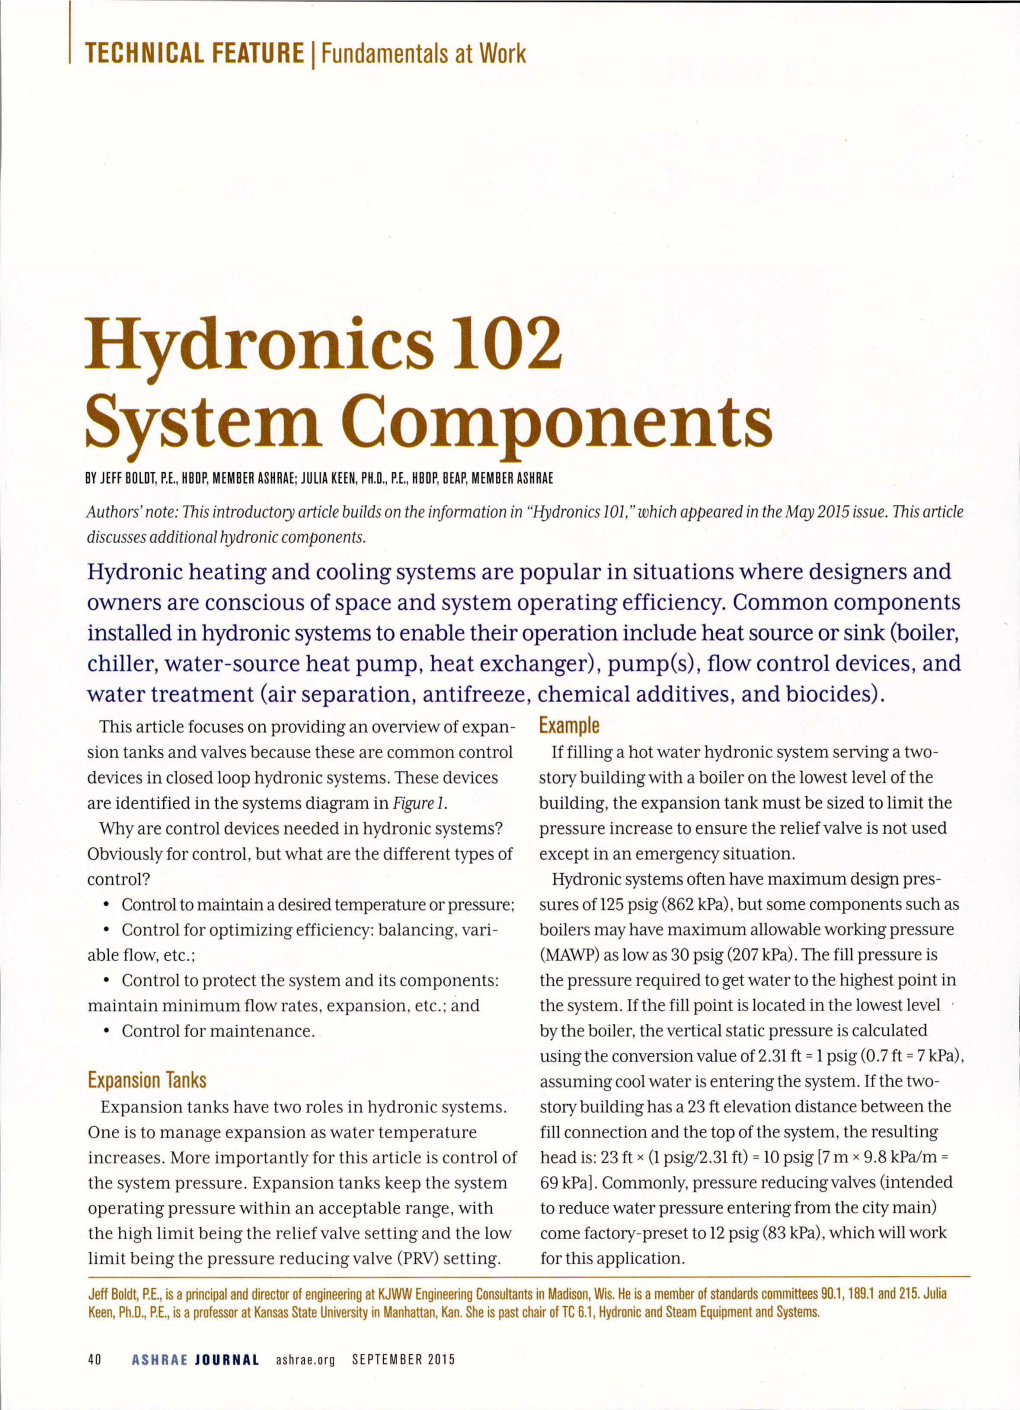 Hydronics 102 System Components